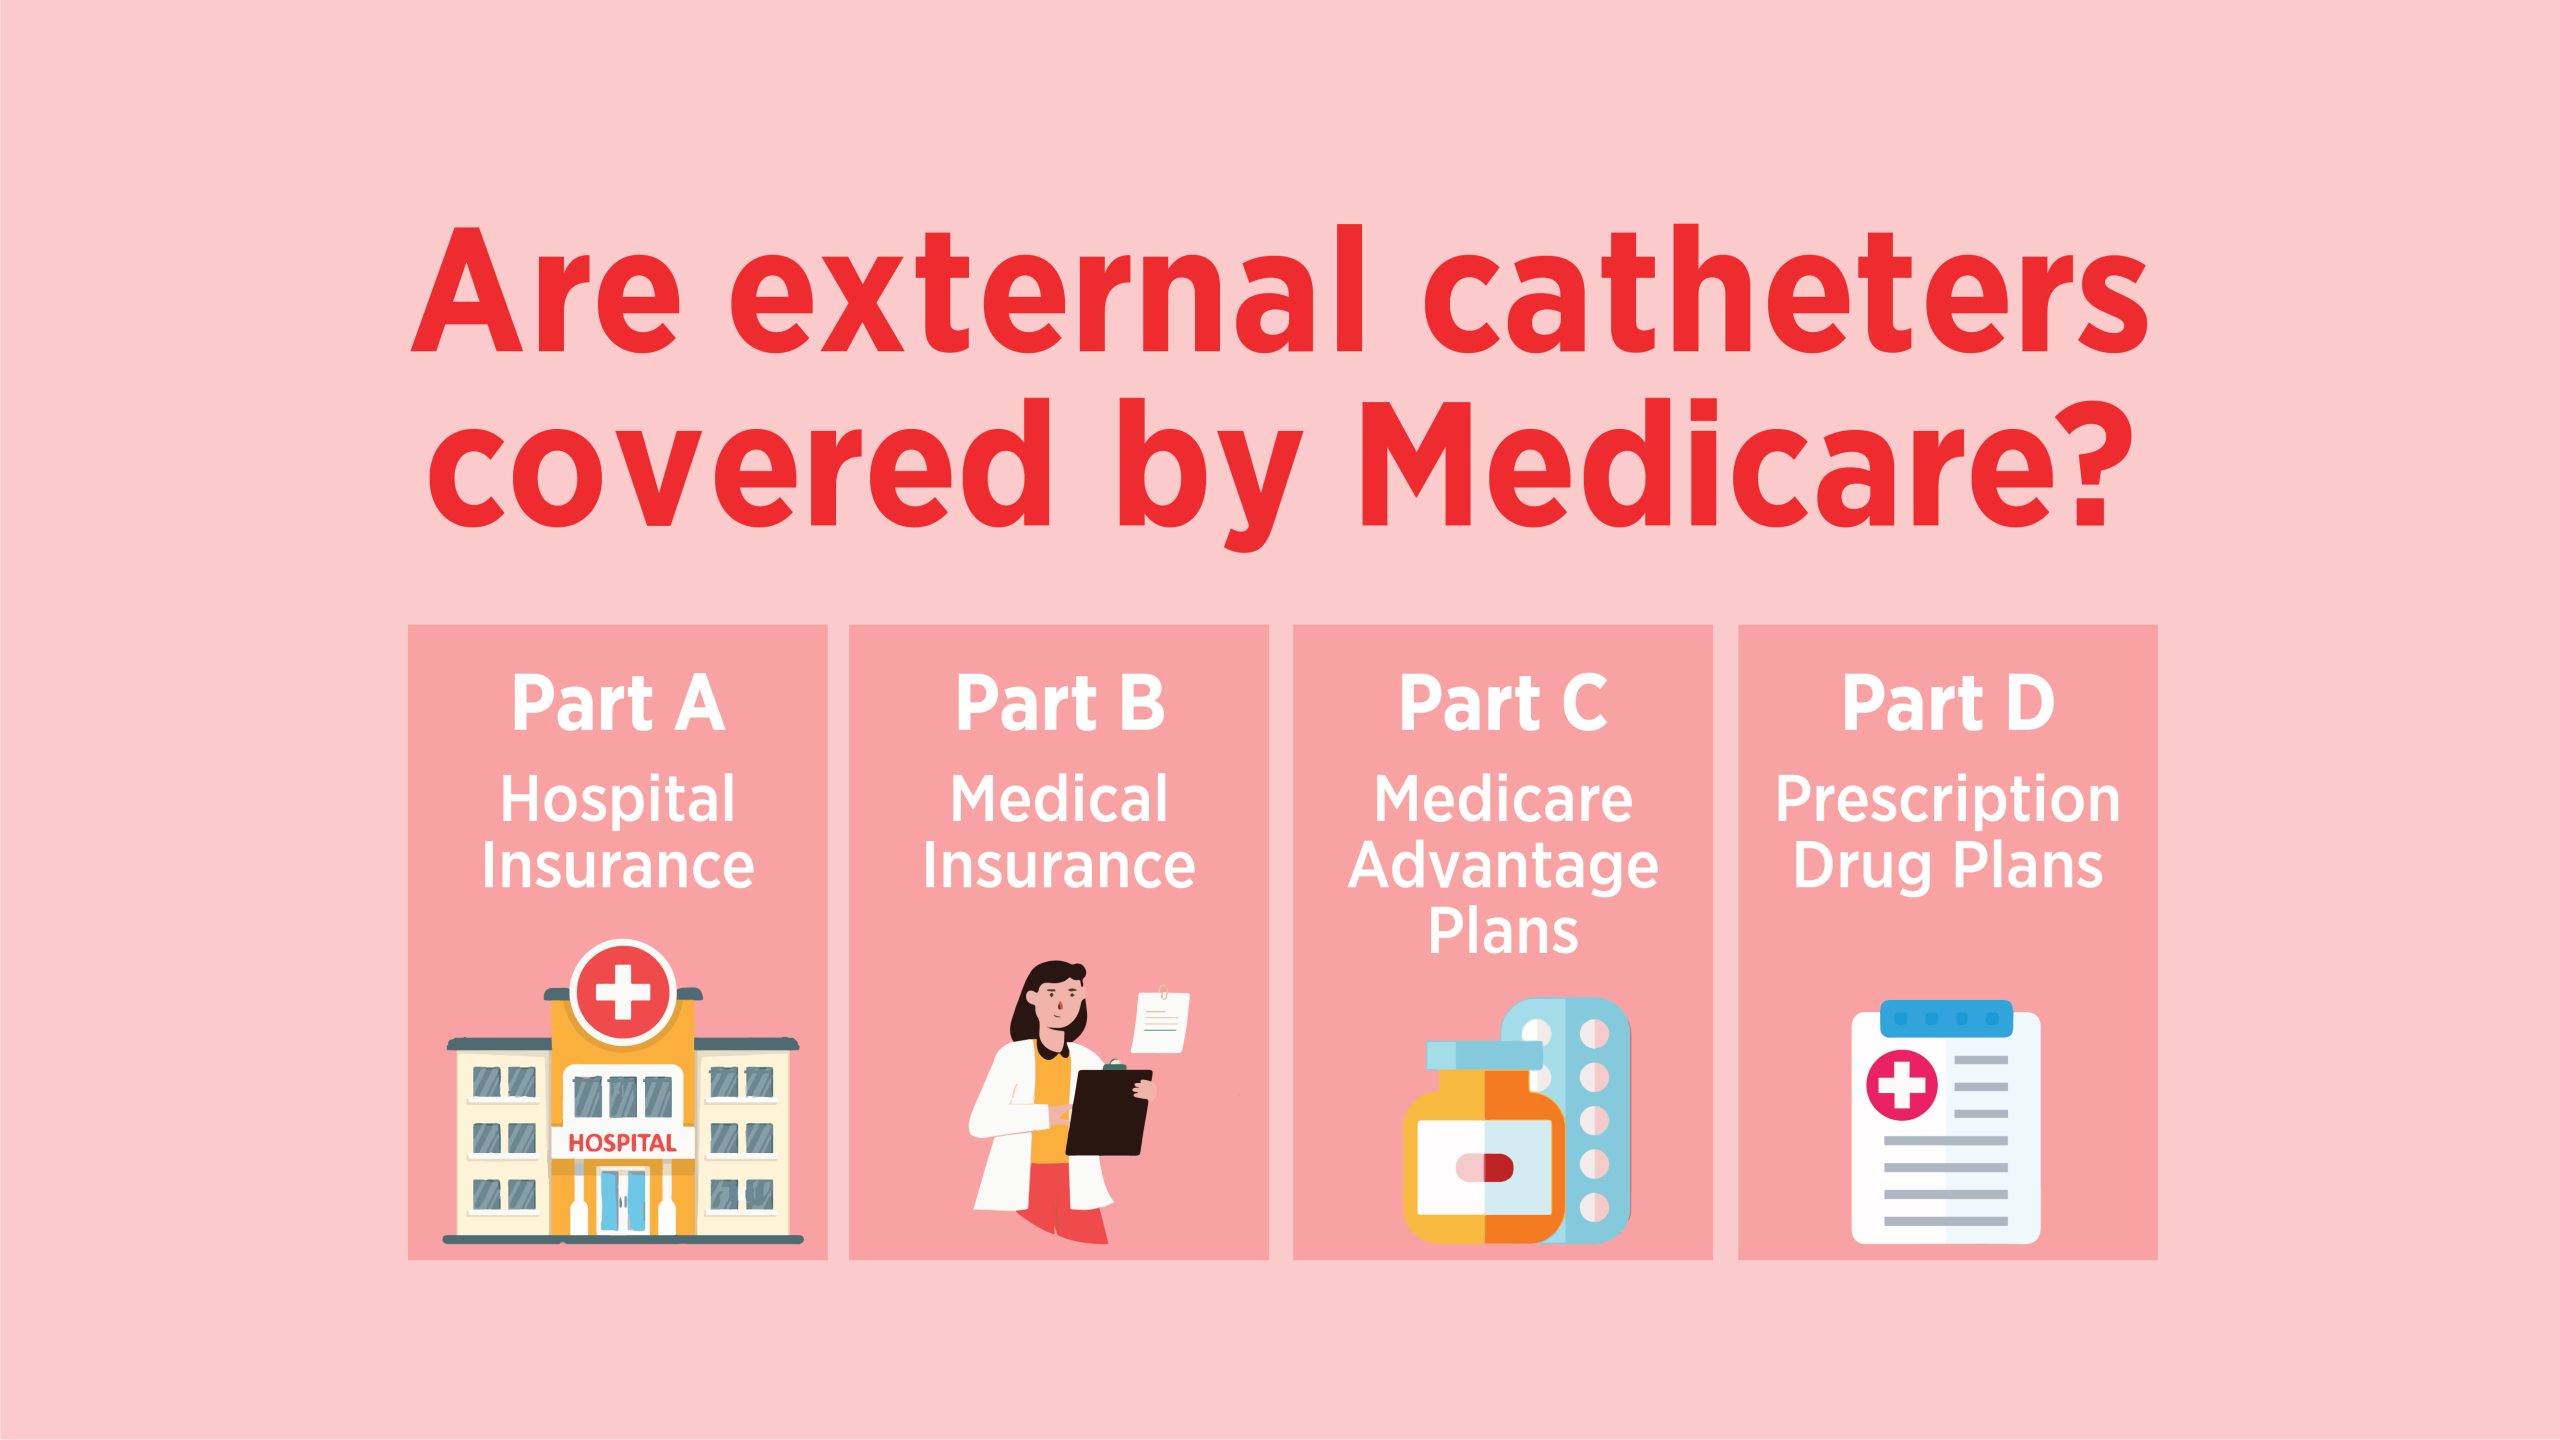 Are External Catheters Covered by Medicare